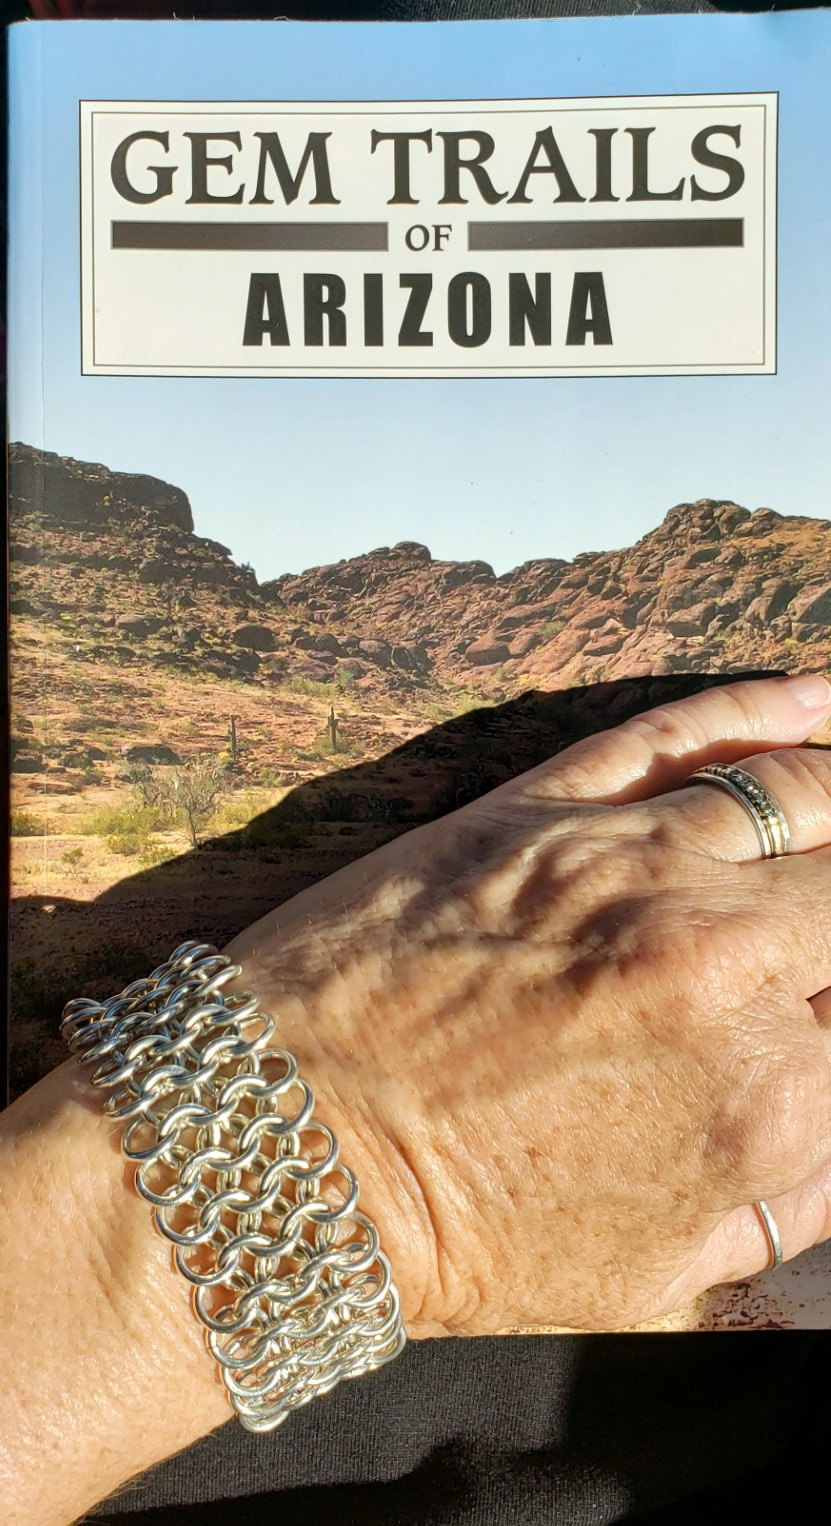 Gem Trails of Arizona and handmade statement sterling silver chain link bracelet and stacking rings